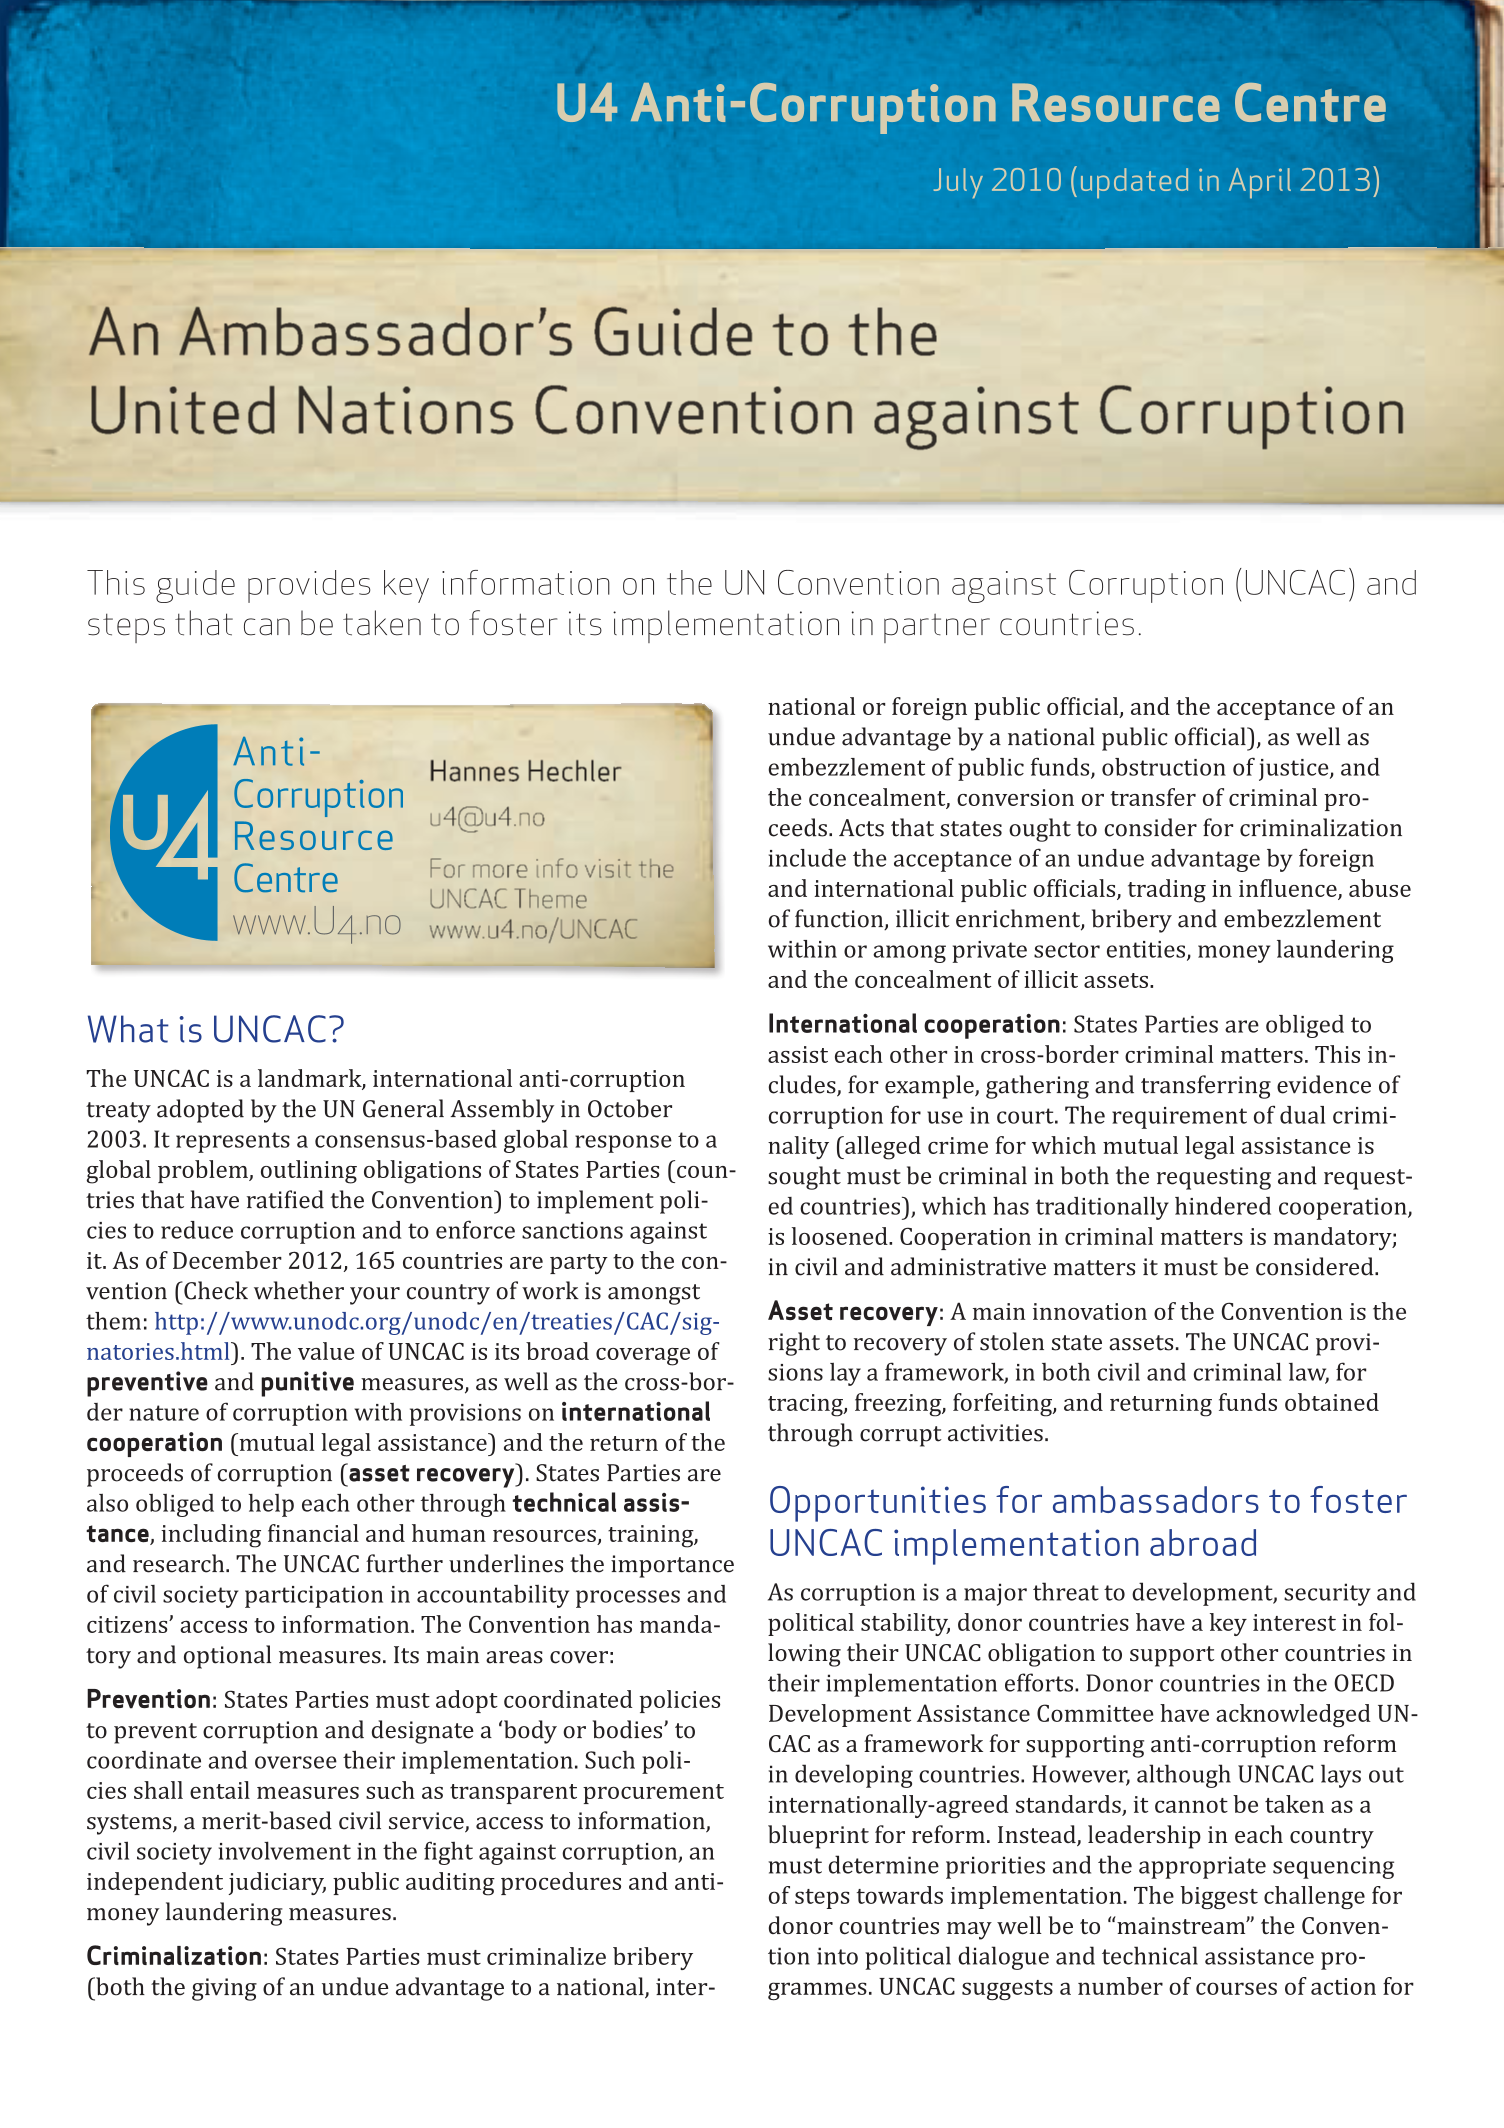 An ambassador's guide to the United Nations Convention against Corruption